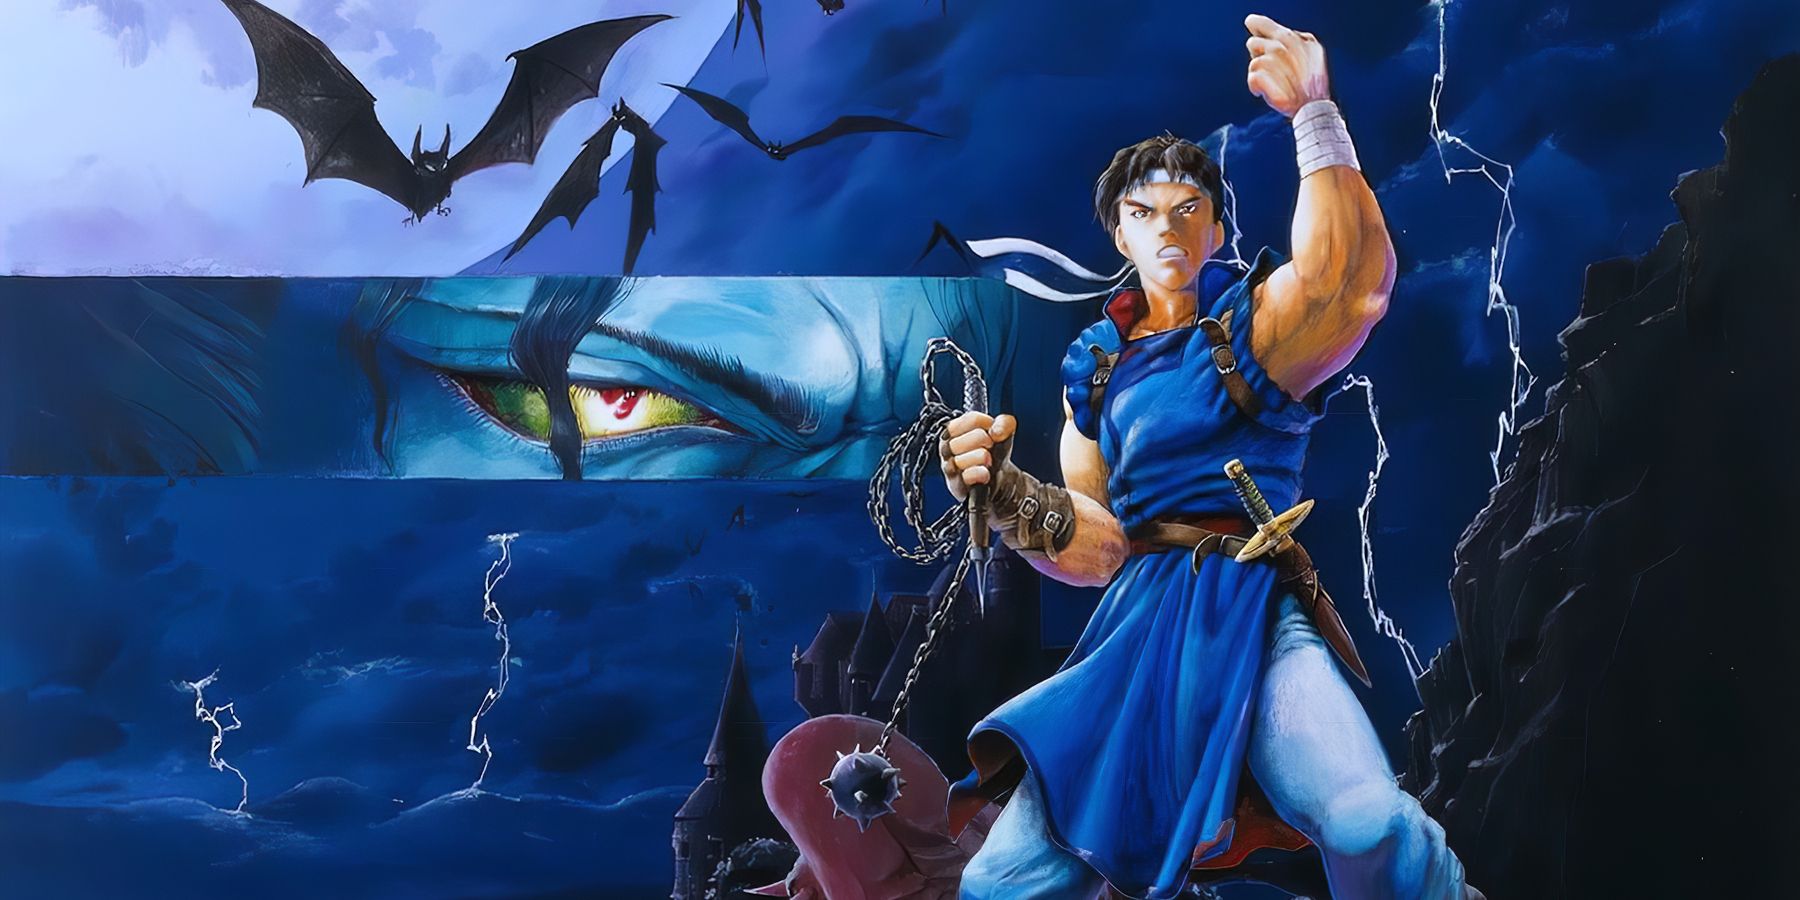 The box art for Castlevania: Rondo of Blood